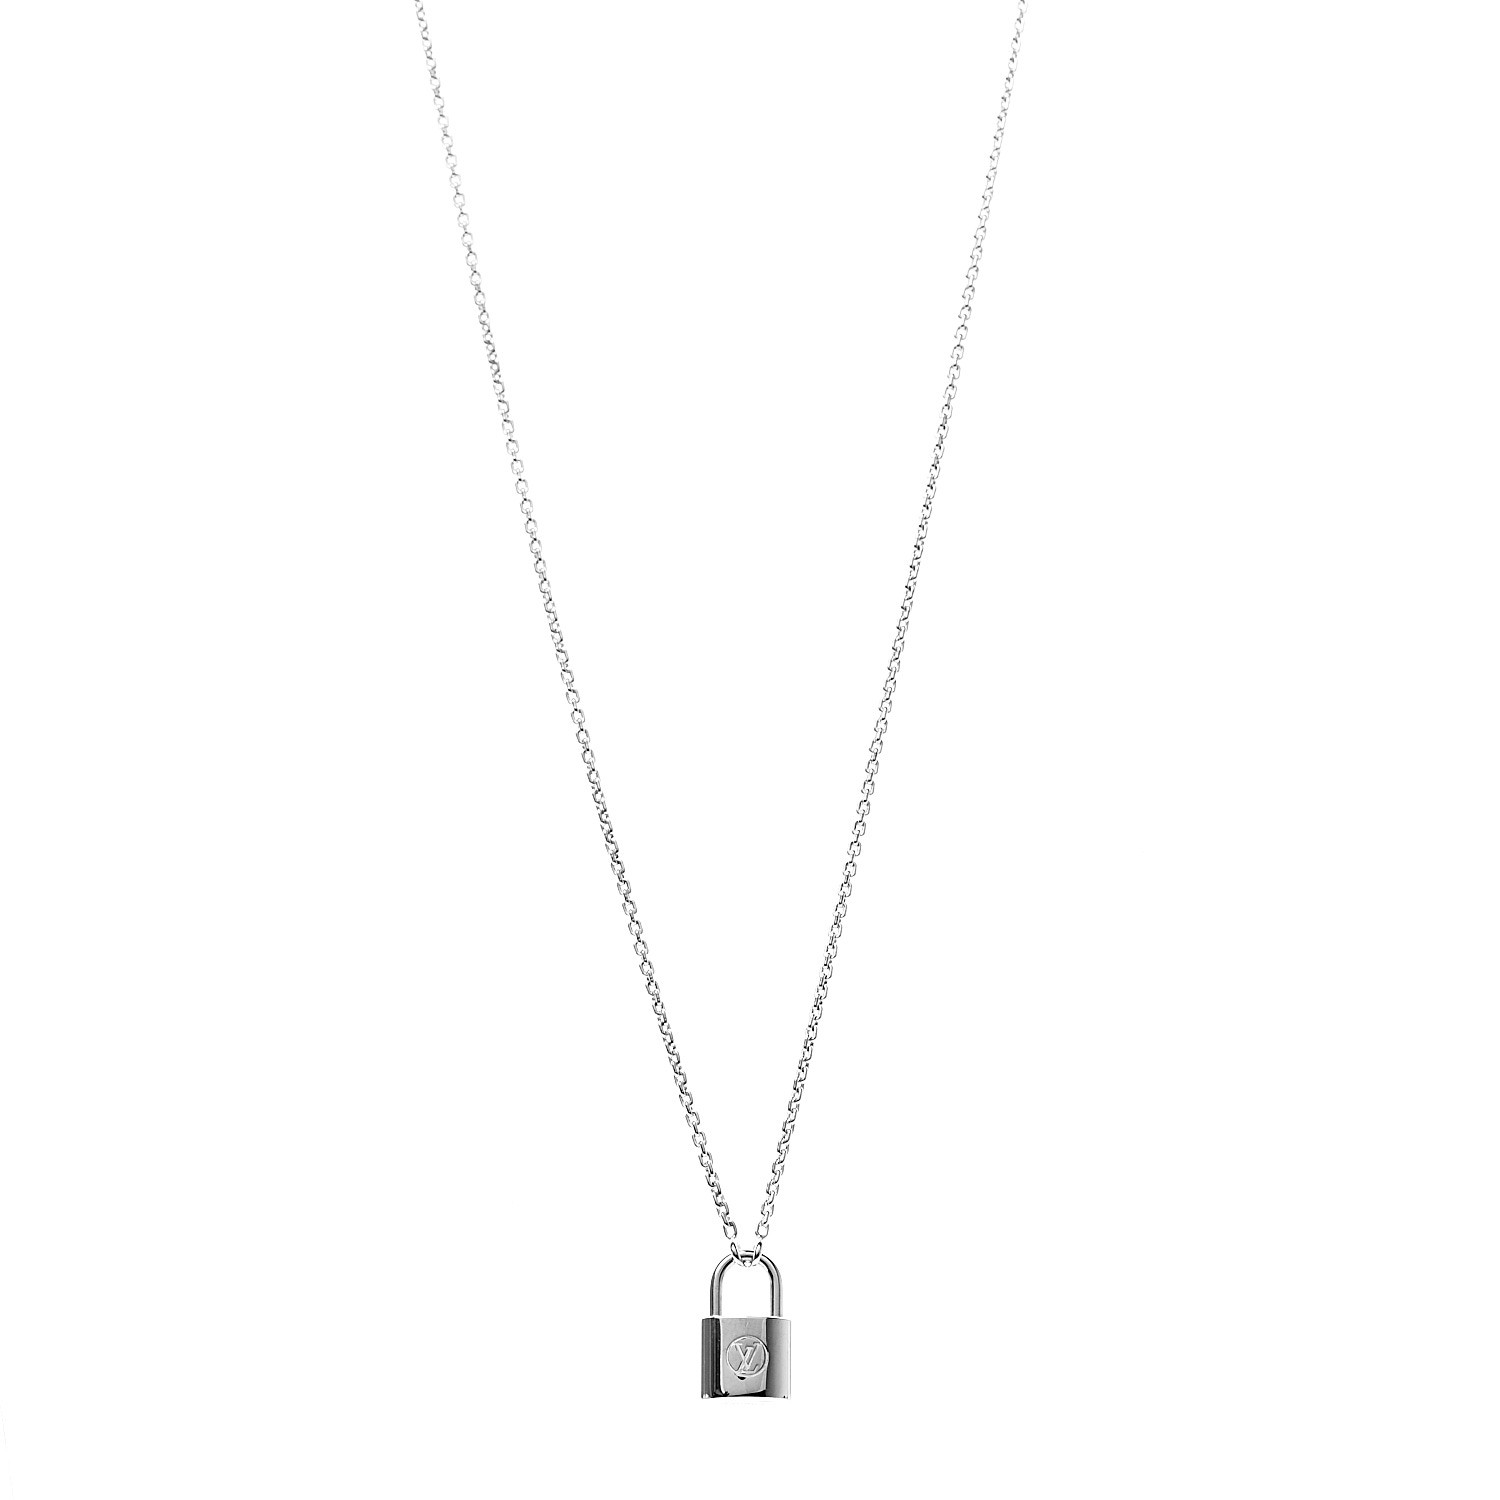 LOUIS VUITTON Sterling Silver Lockit Necklace 531617